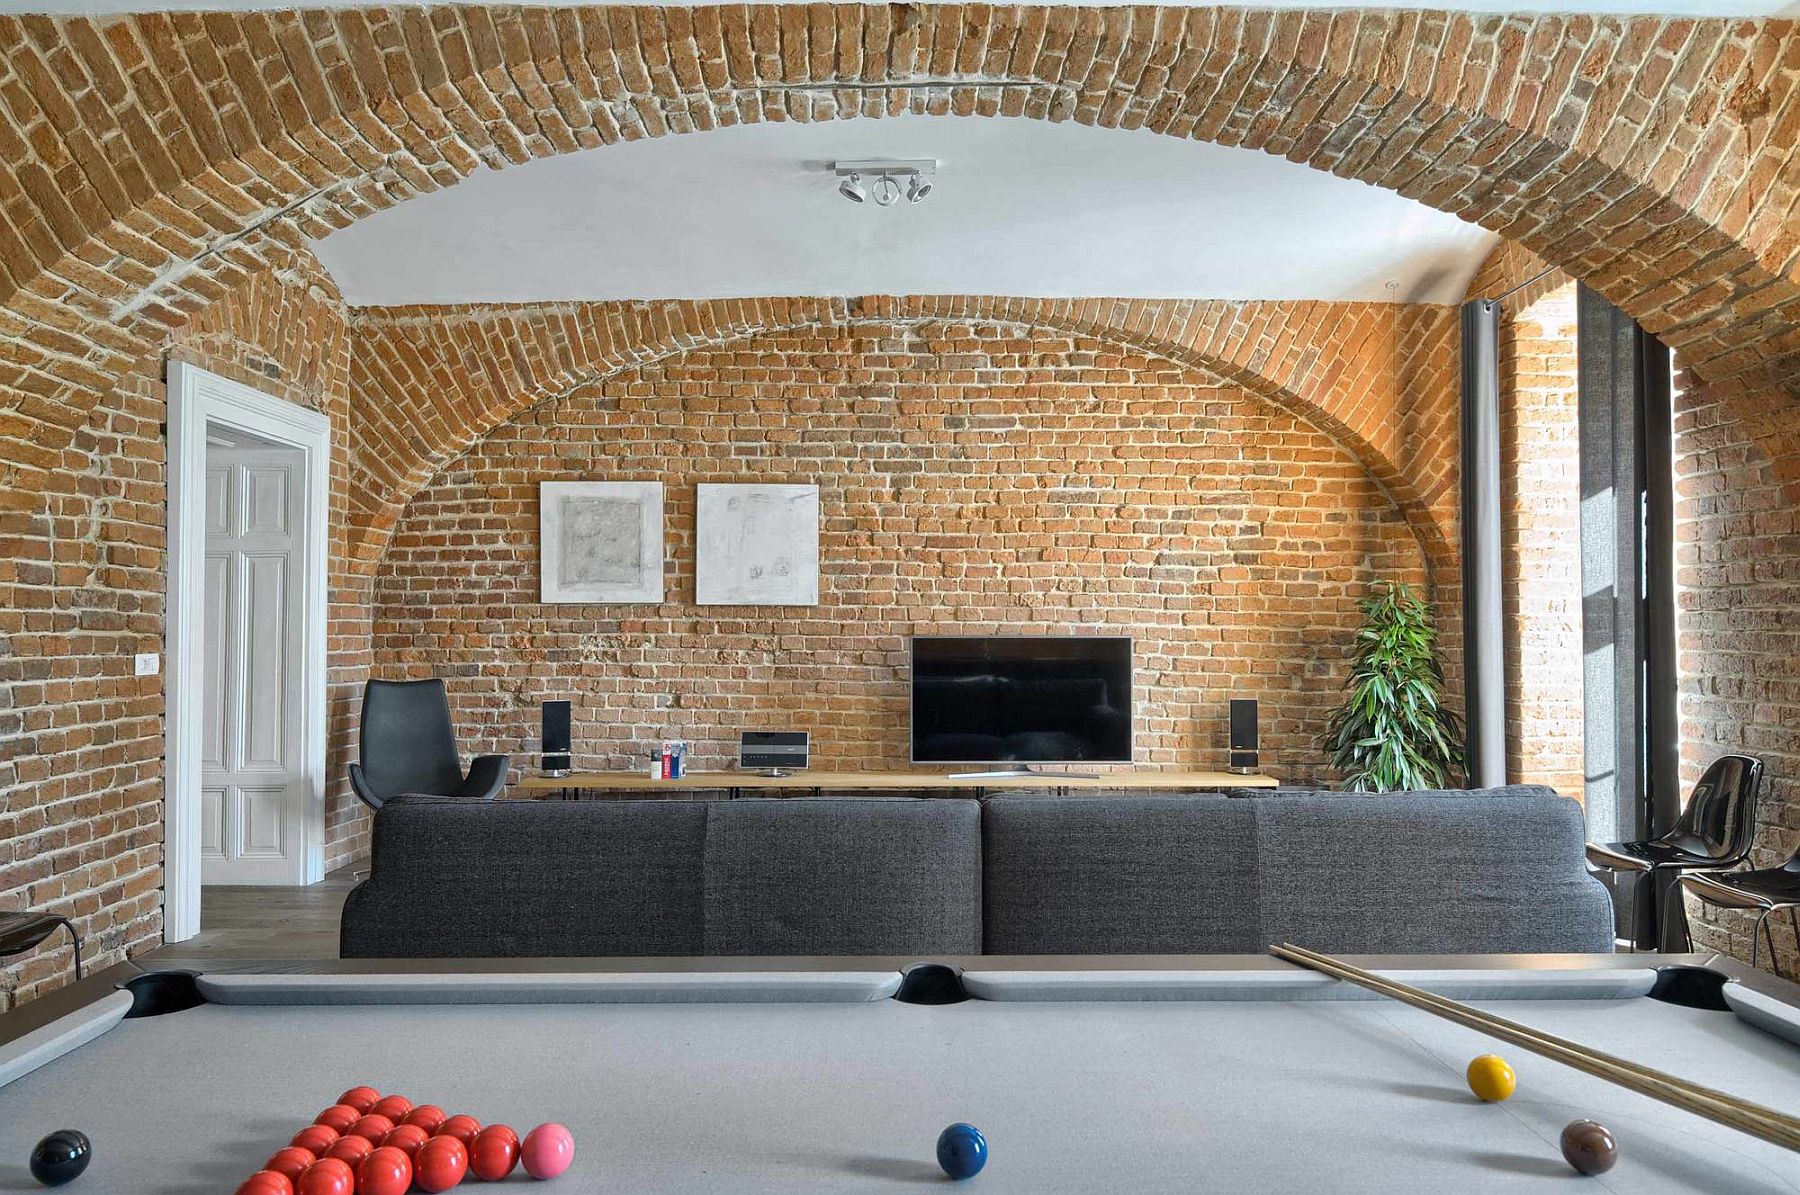 Original, exposed brick walls of the restored apartment steal the show here!